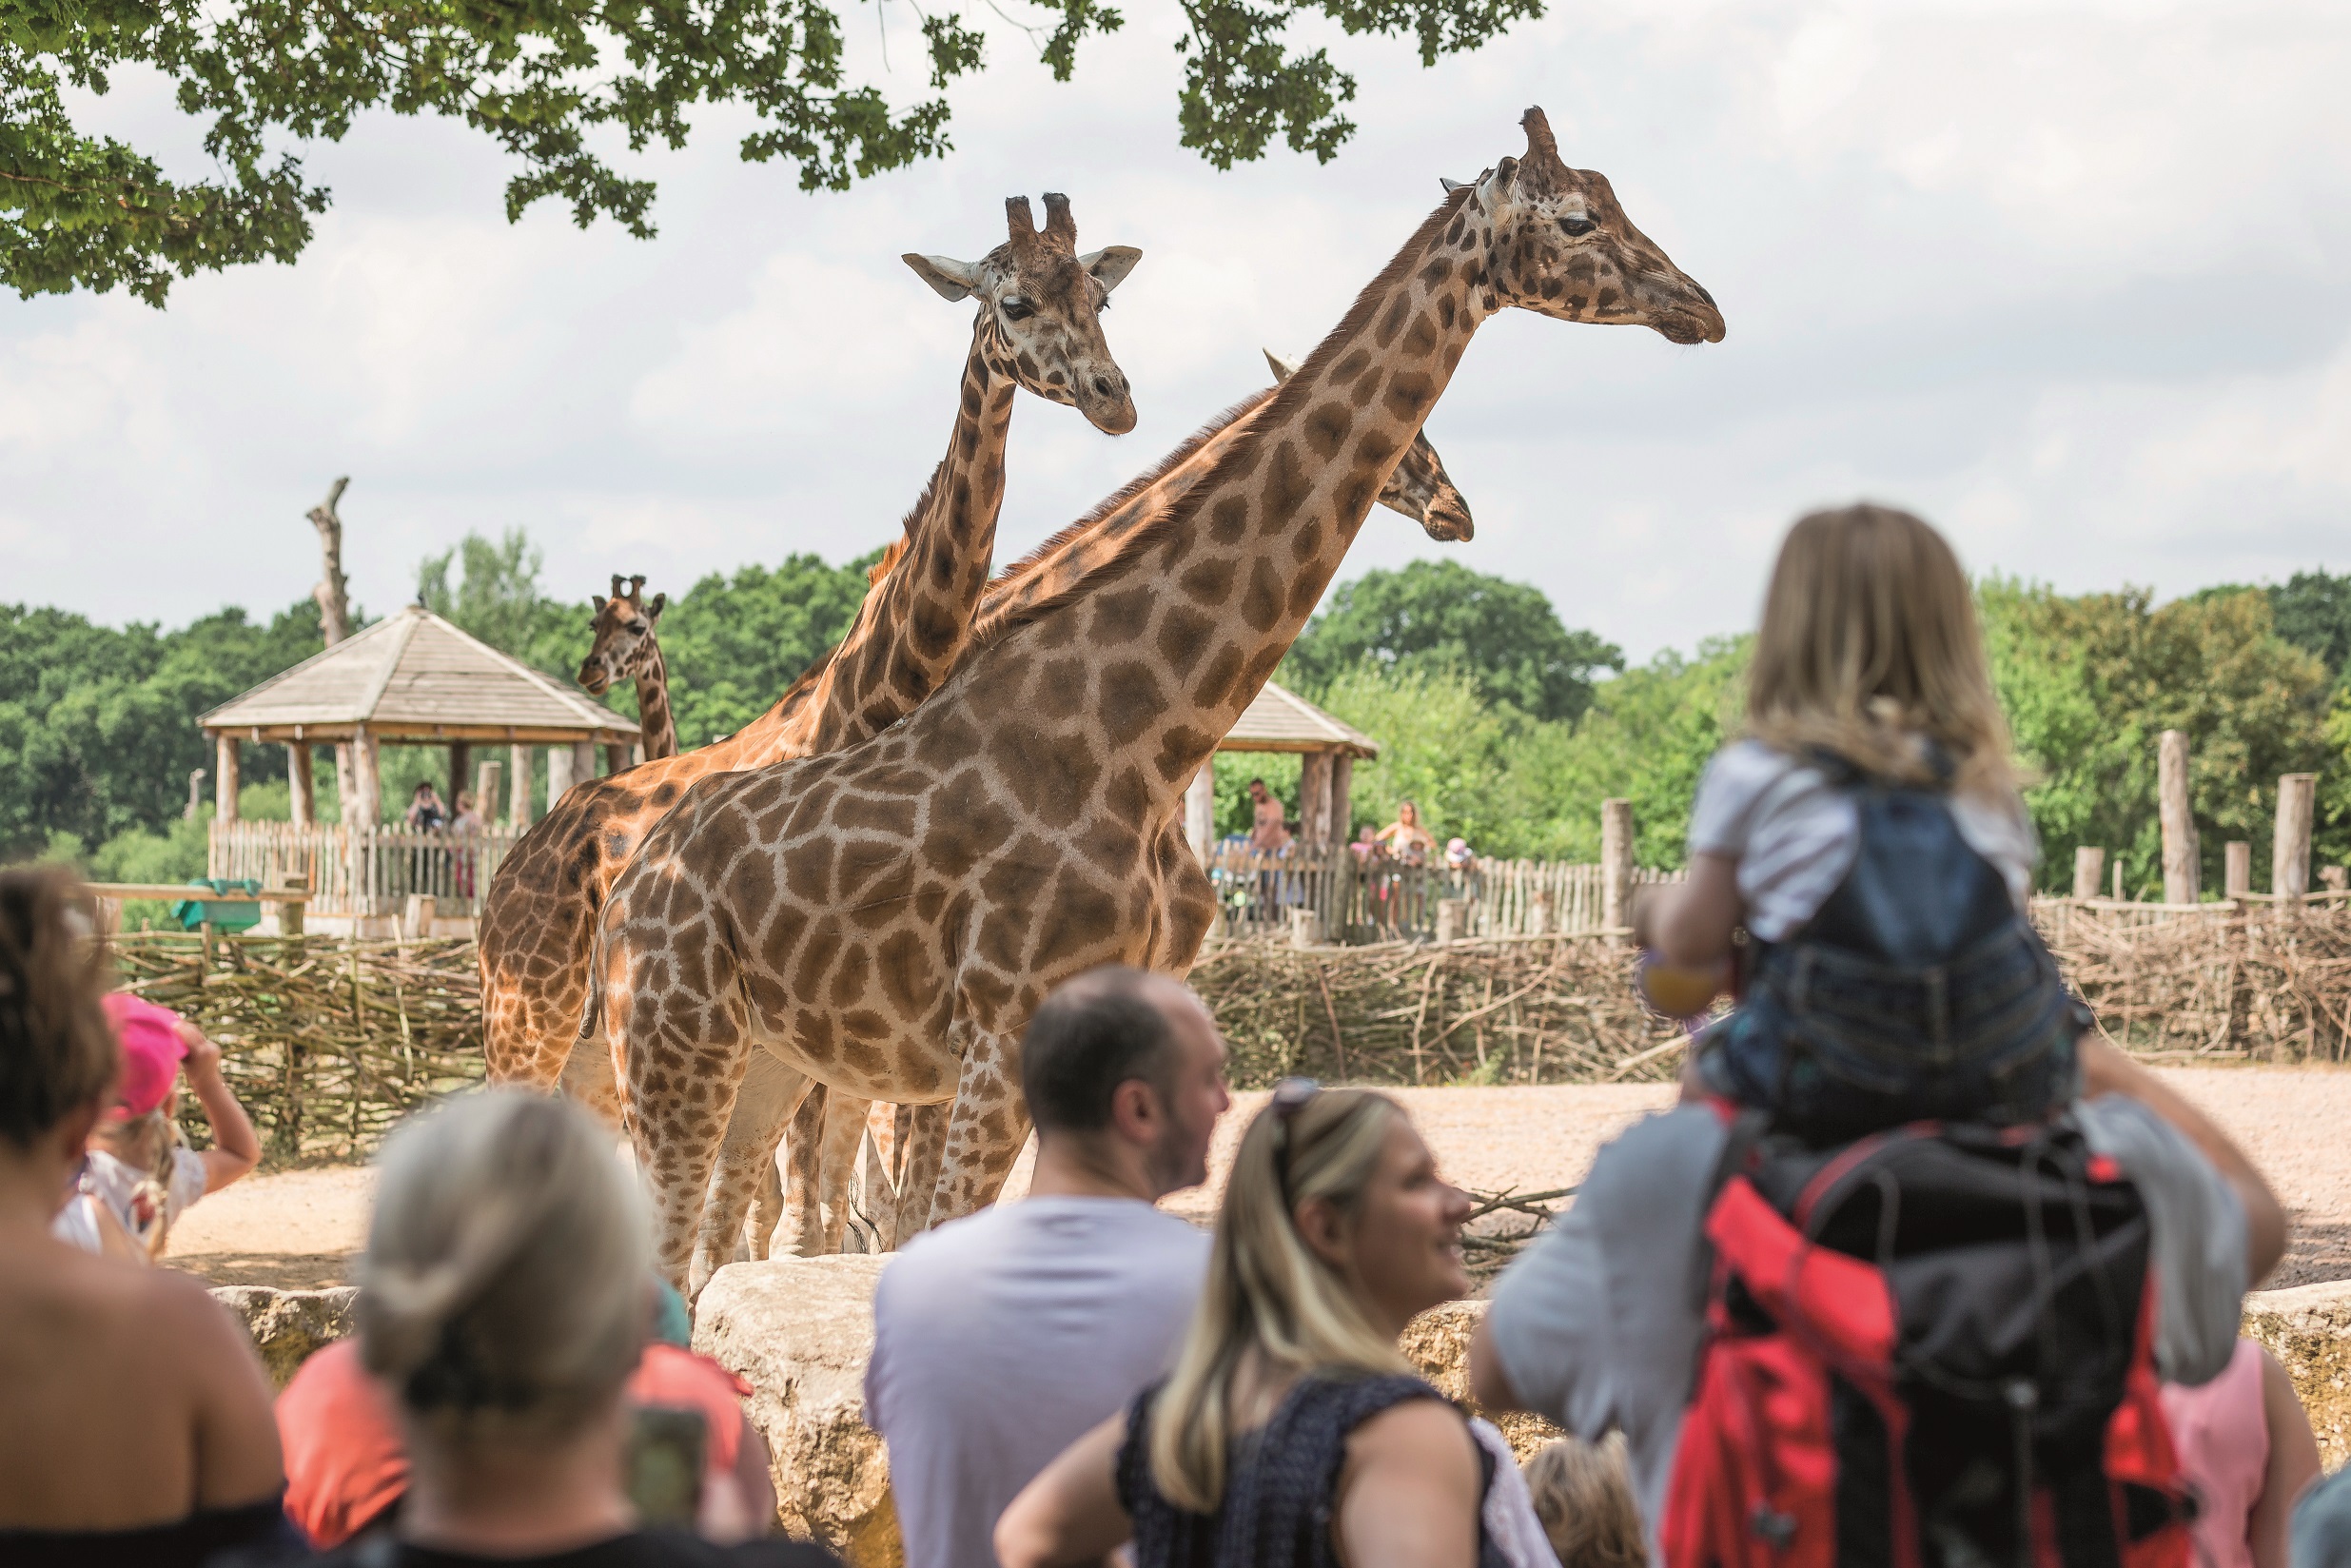 People watching three giraffes in their enclosure at Marwell Zoo